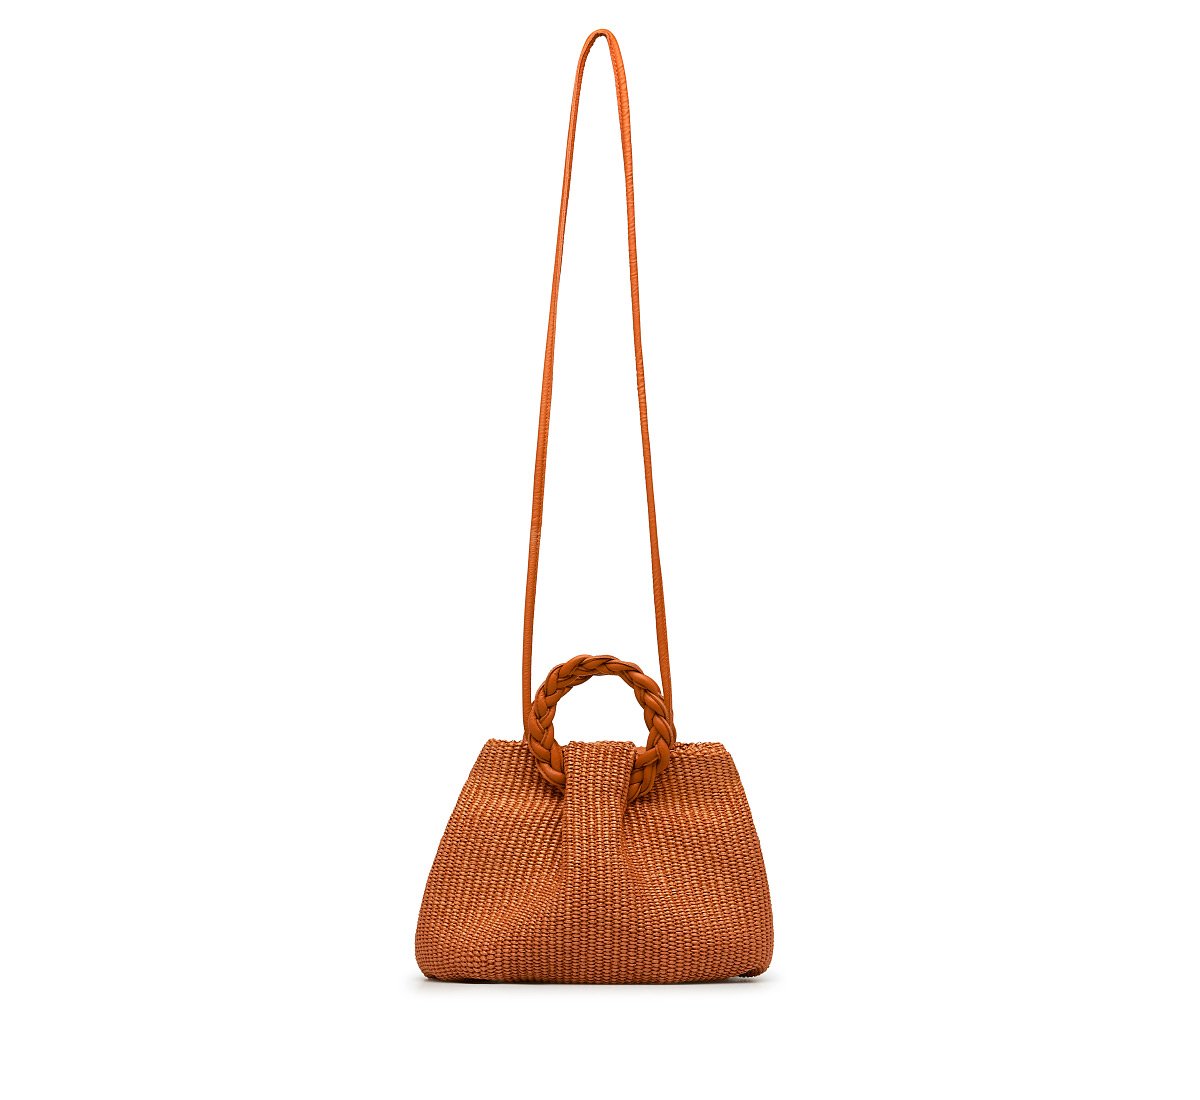 Rafia bag with leather details